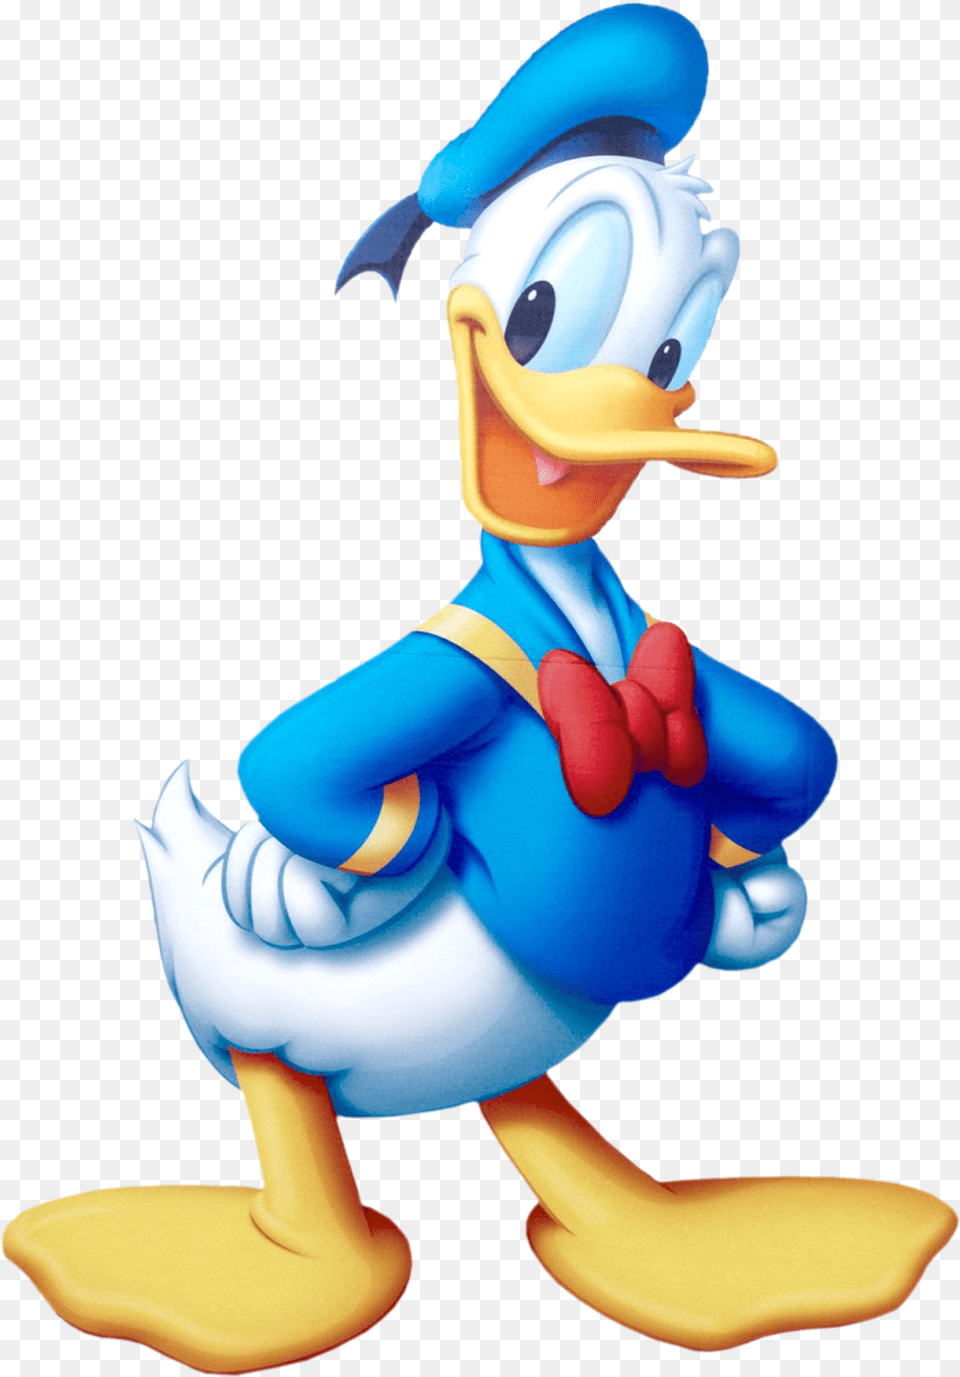 Duck Army In Finland Banned Donald Duck As He Never Colour Of Donald Duck, Toy, Cartoon, Figurine Png